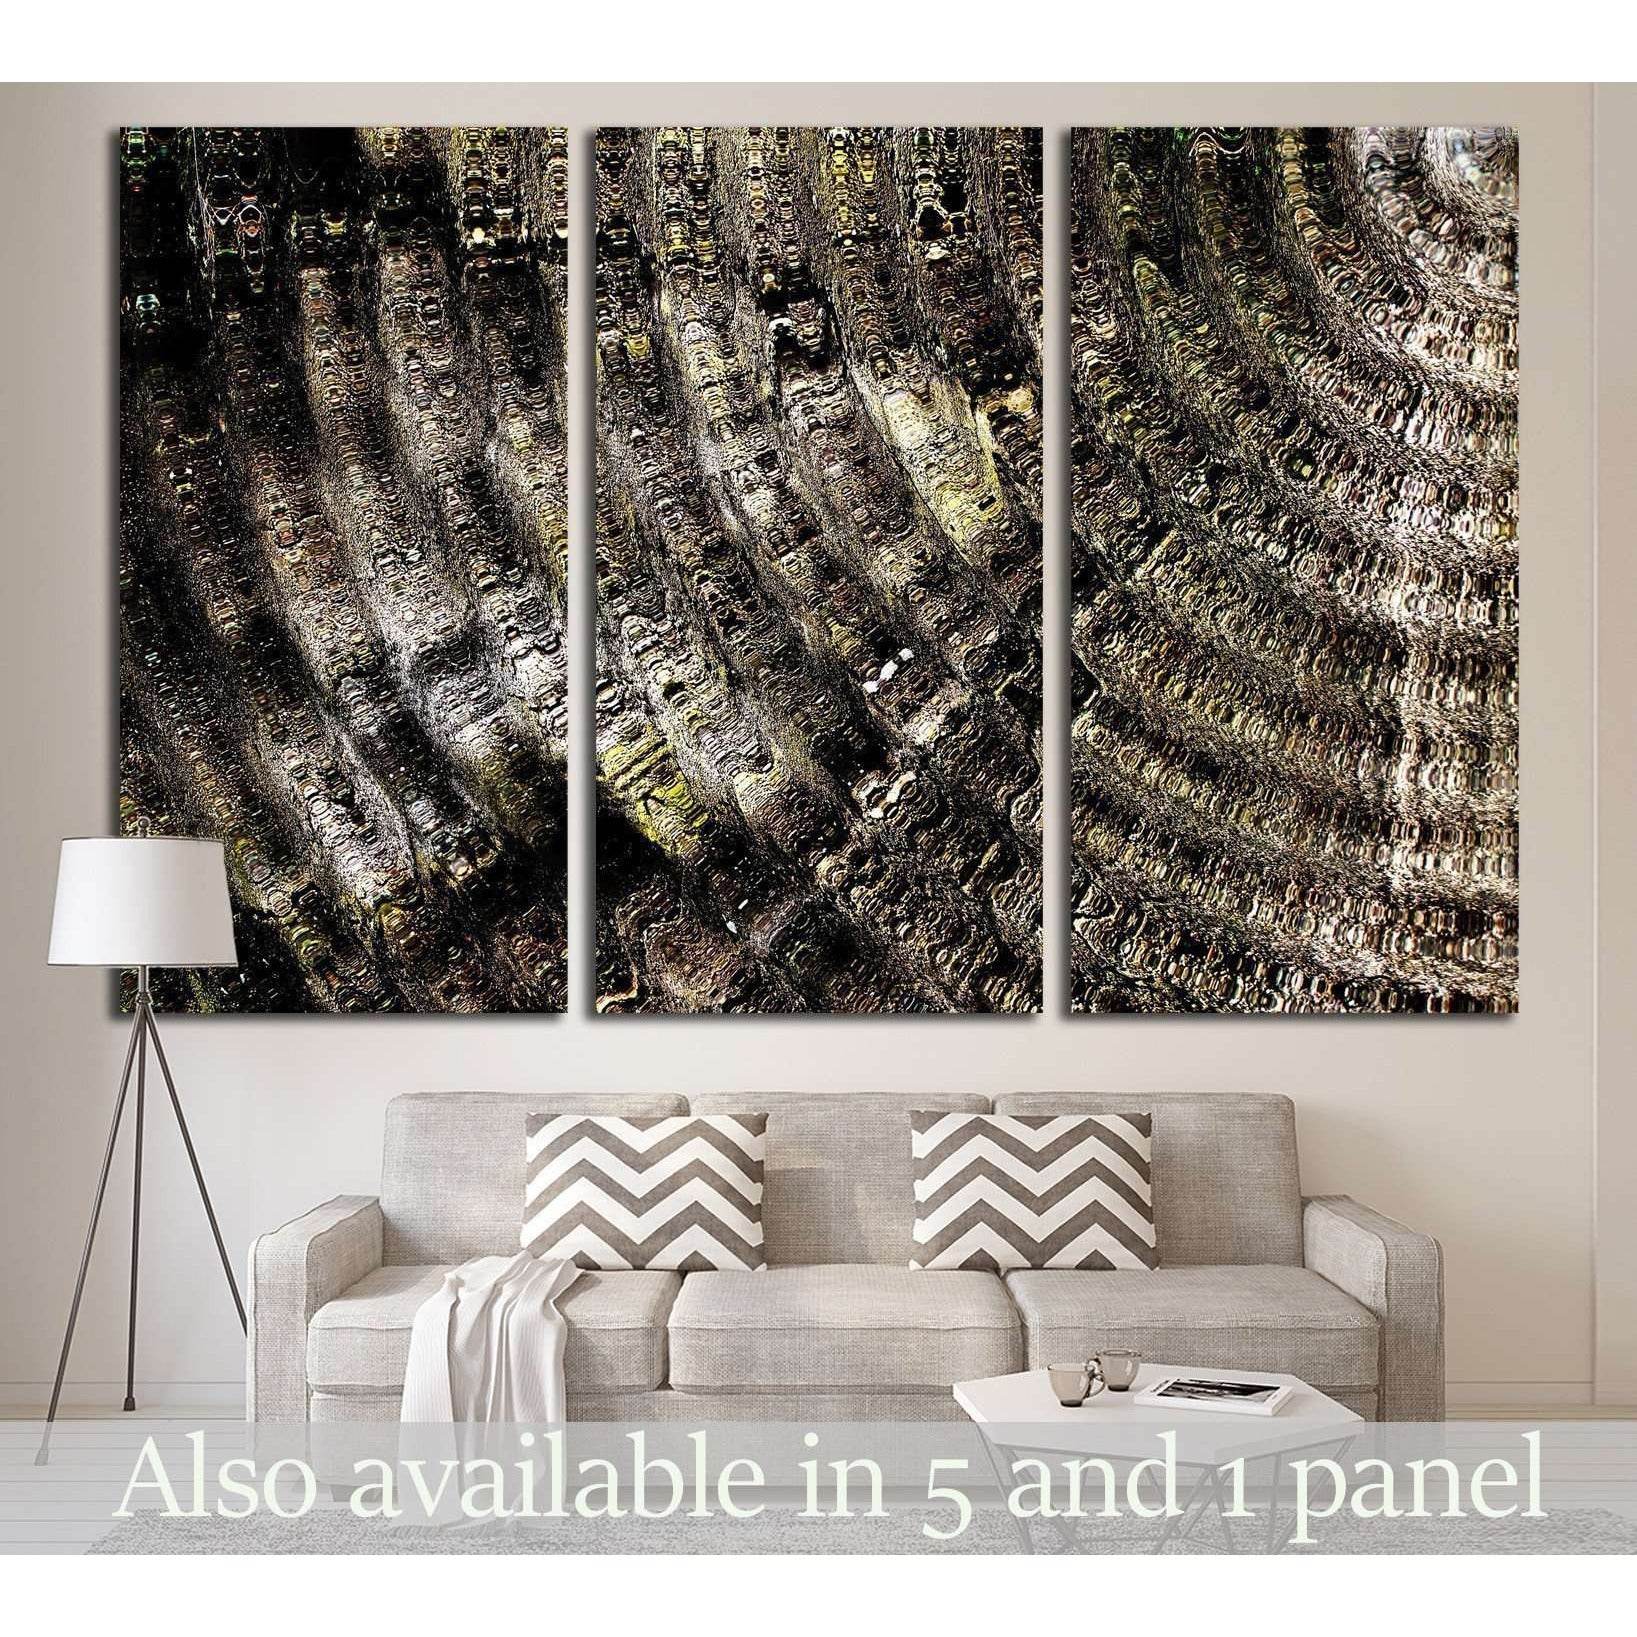 ripple radial weave texture №1587 Ready to Hang Canvas Print